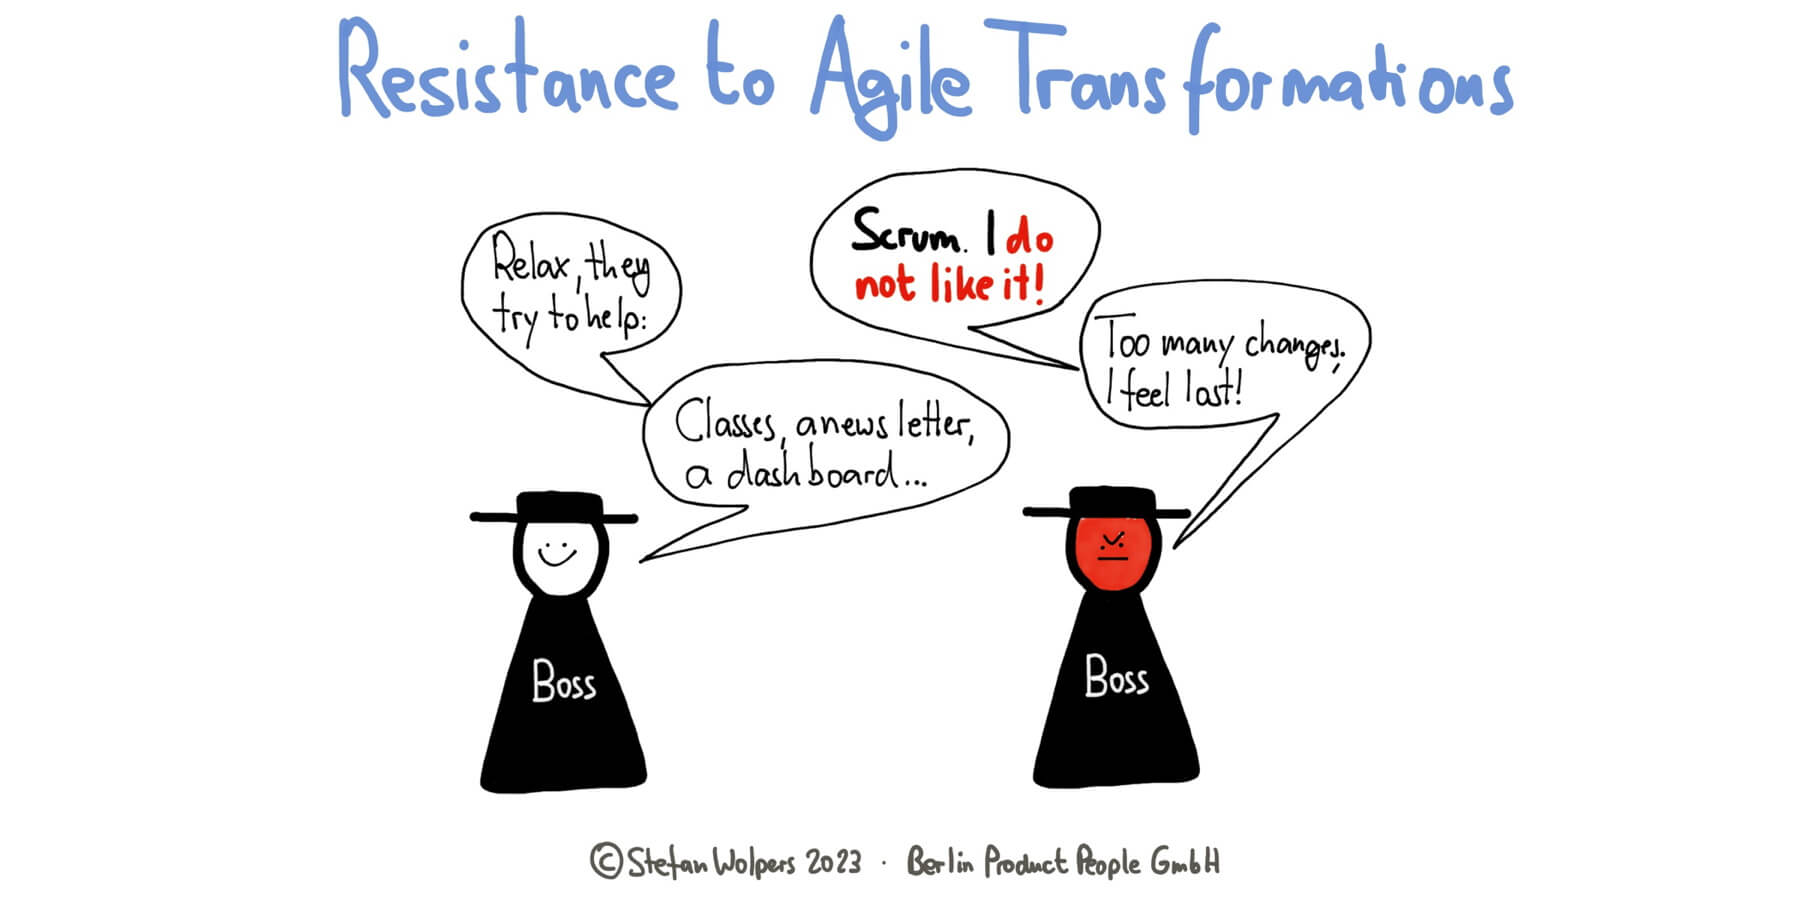 Resistance to Agile Transformations: Reasons and How To Overcome Them — Berlin-Product-People.com